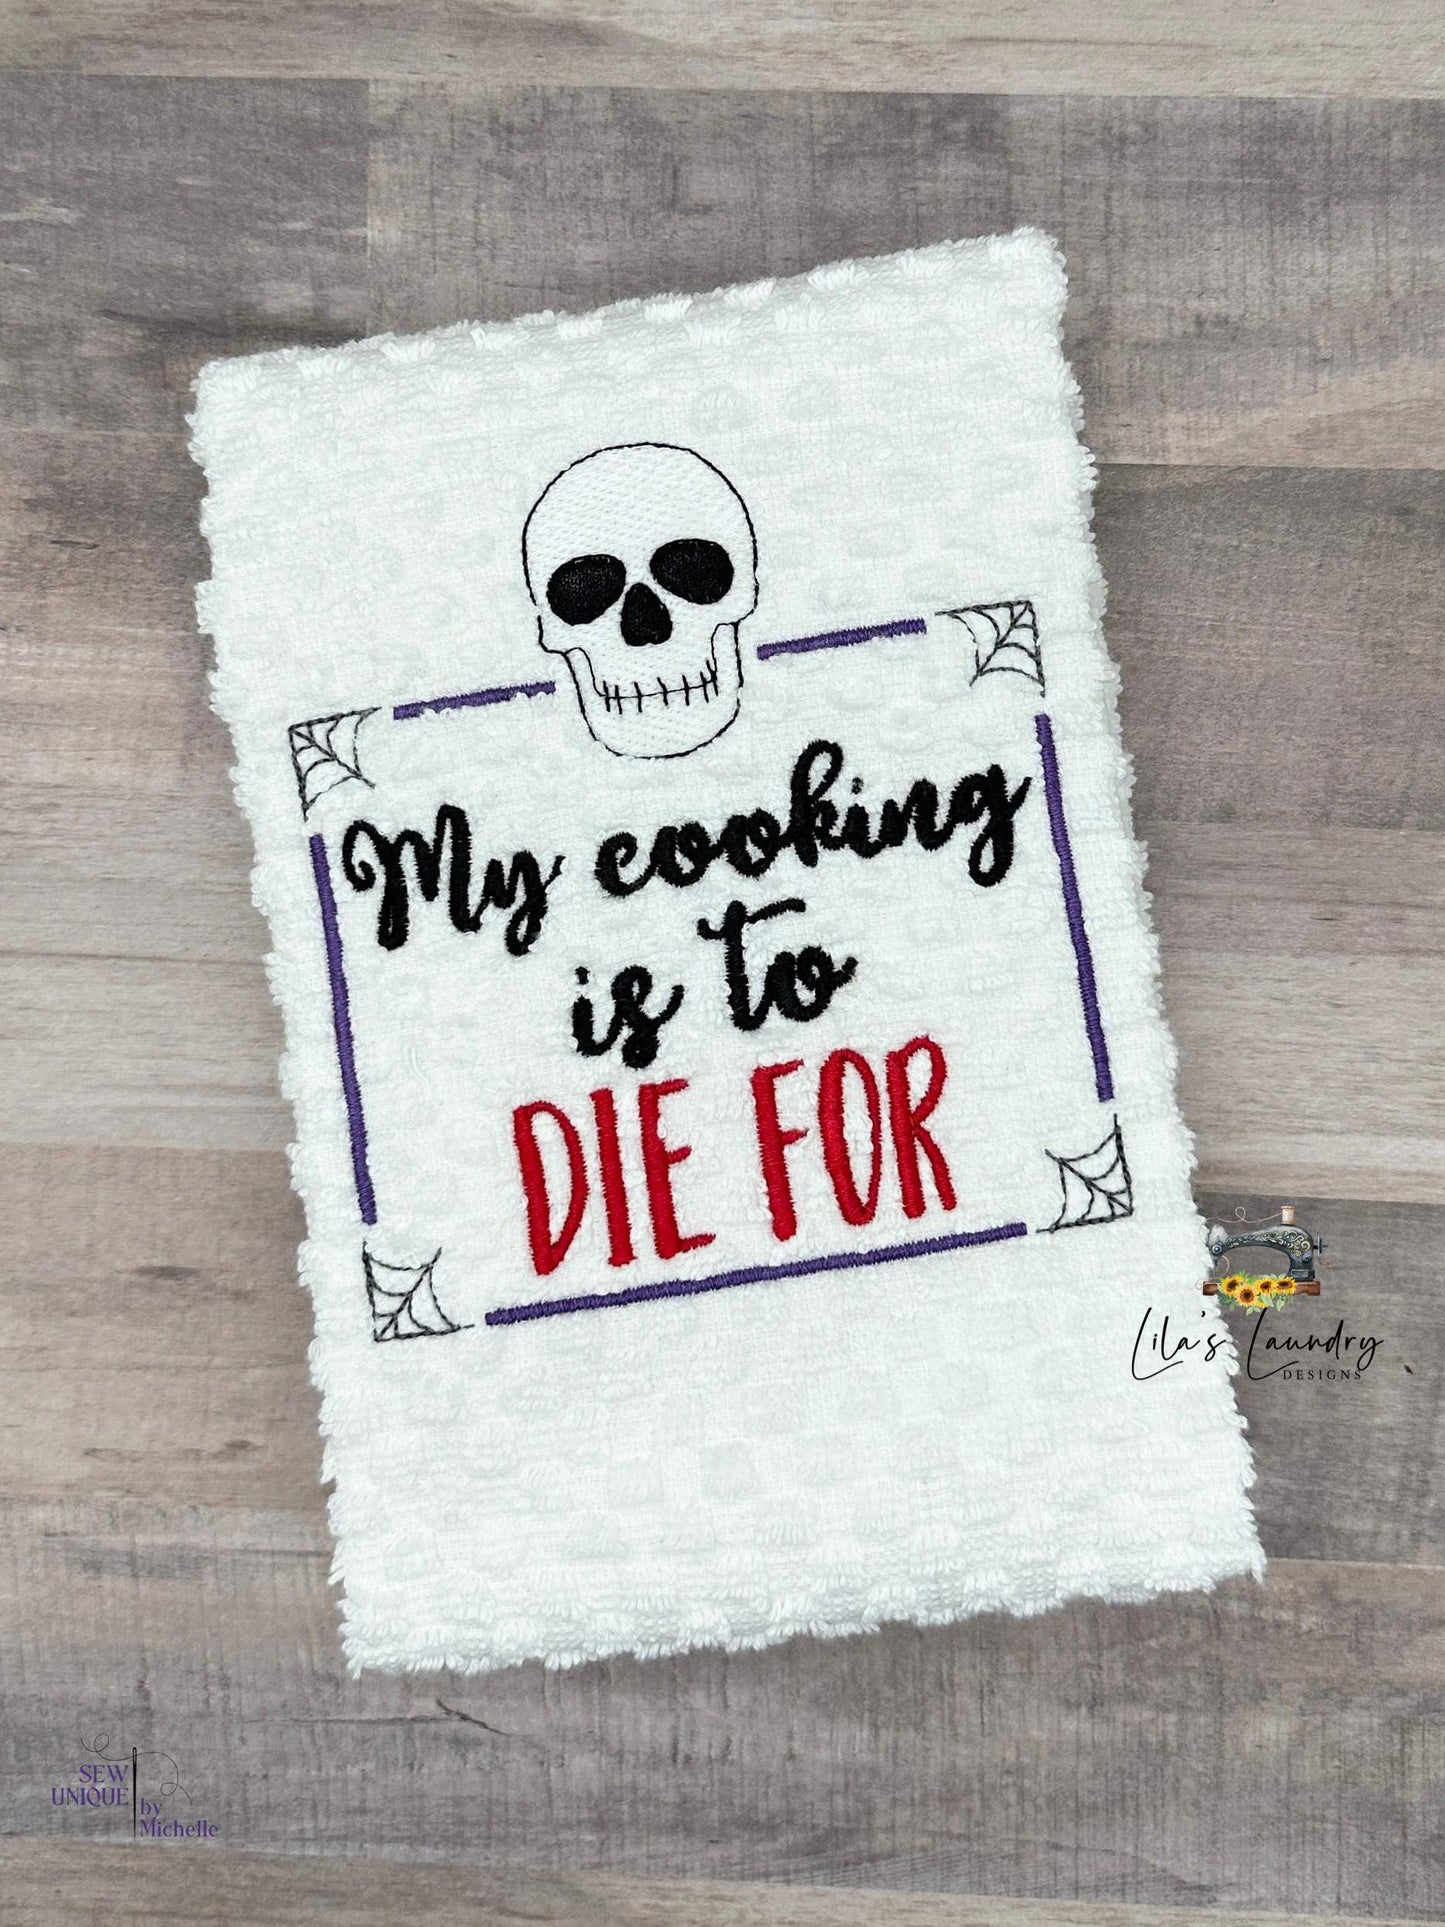 Cooking is to Die for - 3 sizes- Digital Embroidery Design